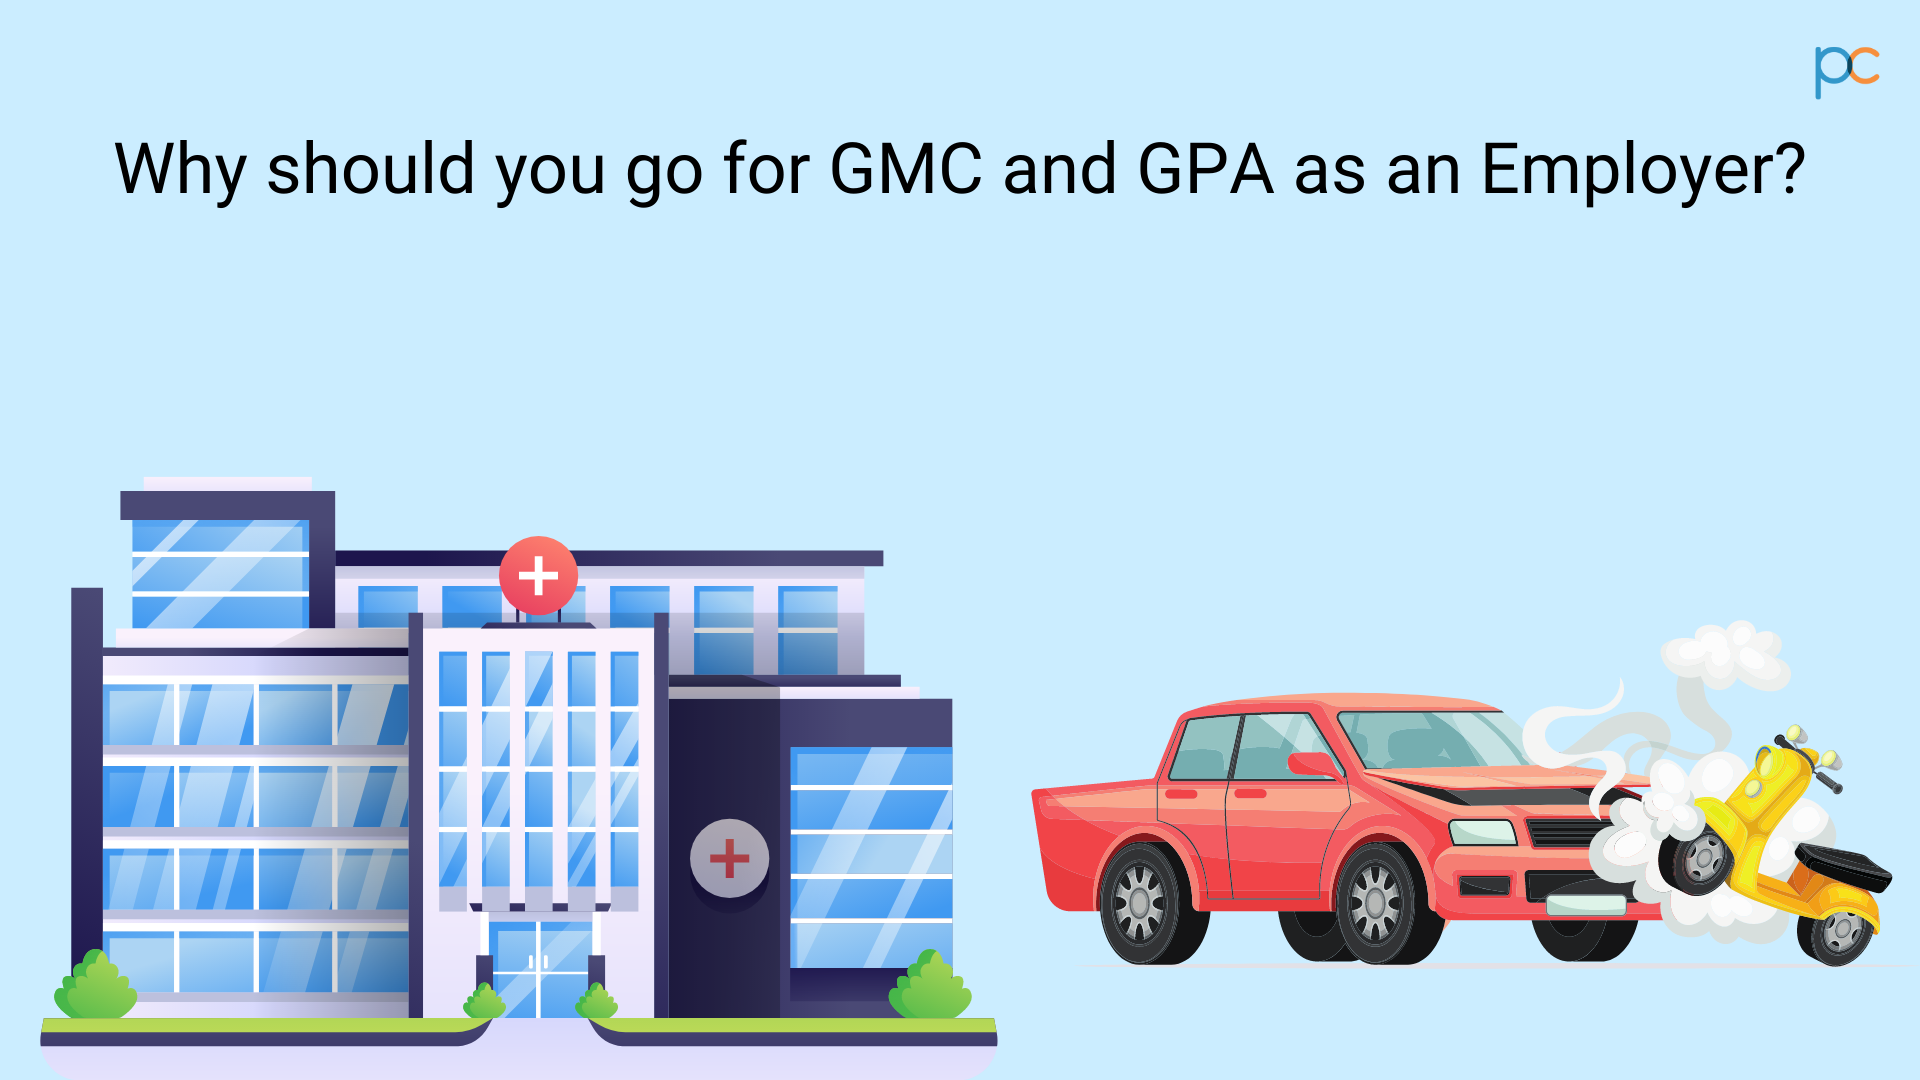 Why should you go for GMC and GPA as an Employer